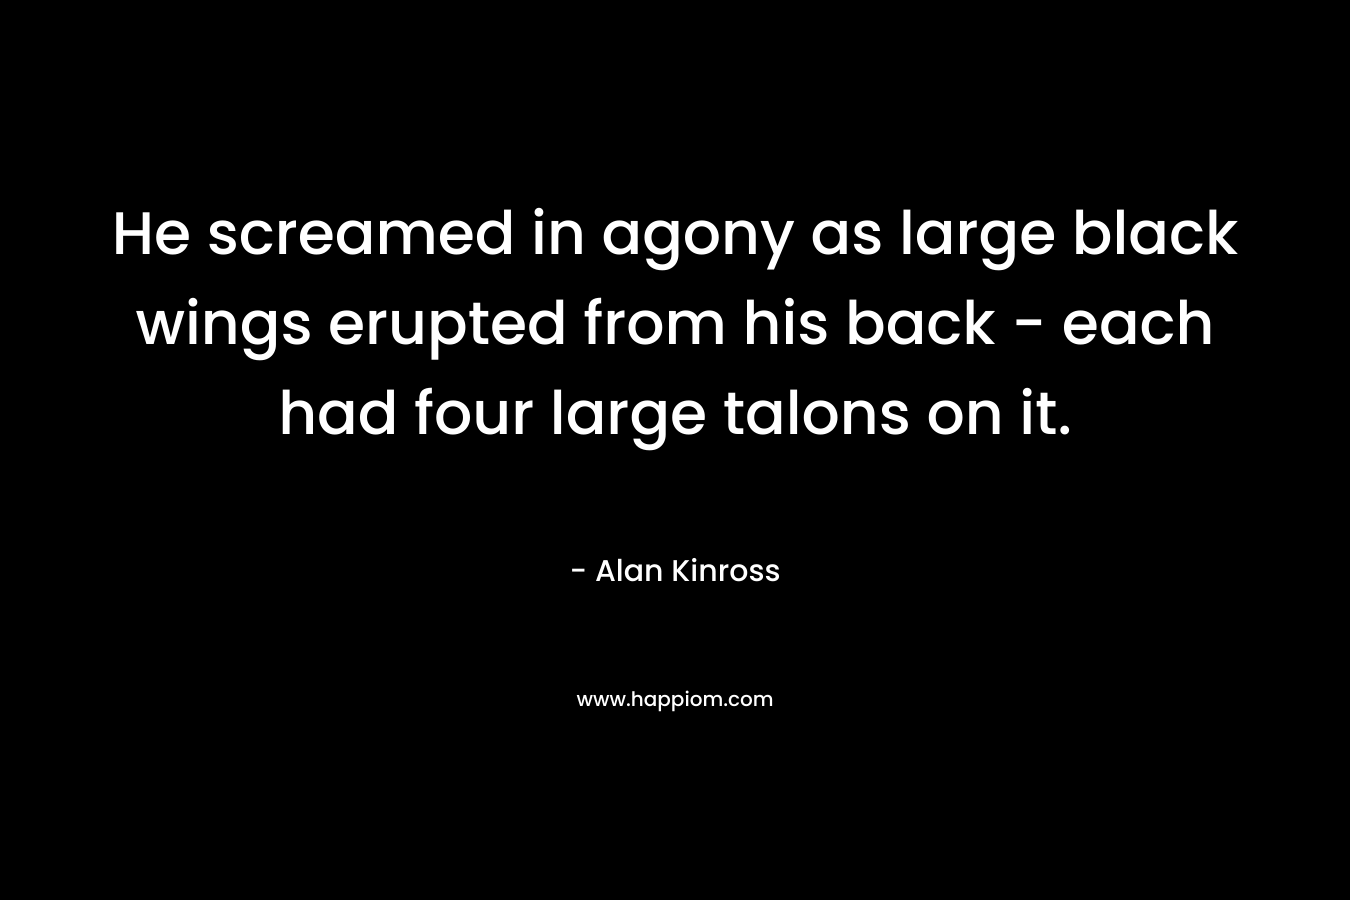 He screamed in agony as large black wings erupted from his back – each had four large talons on it. – Alan Kinross